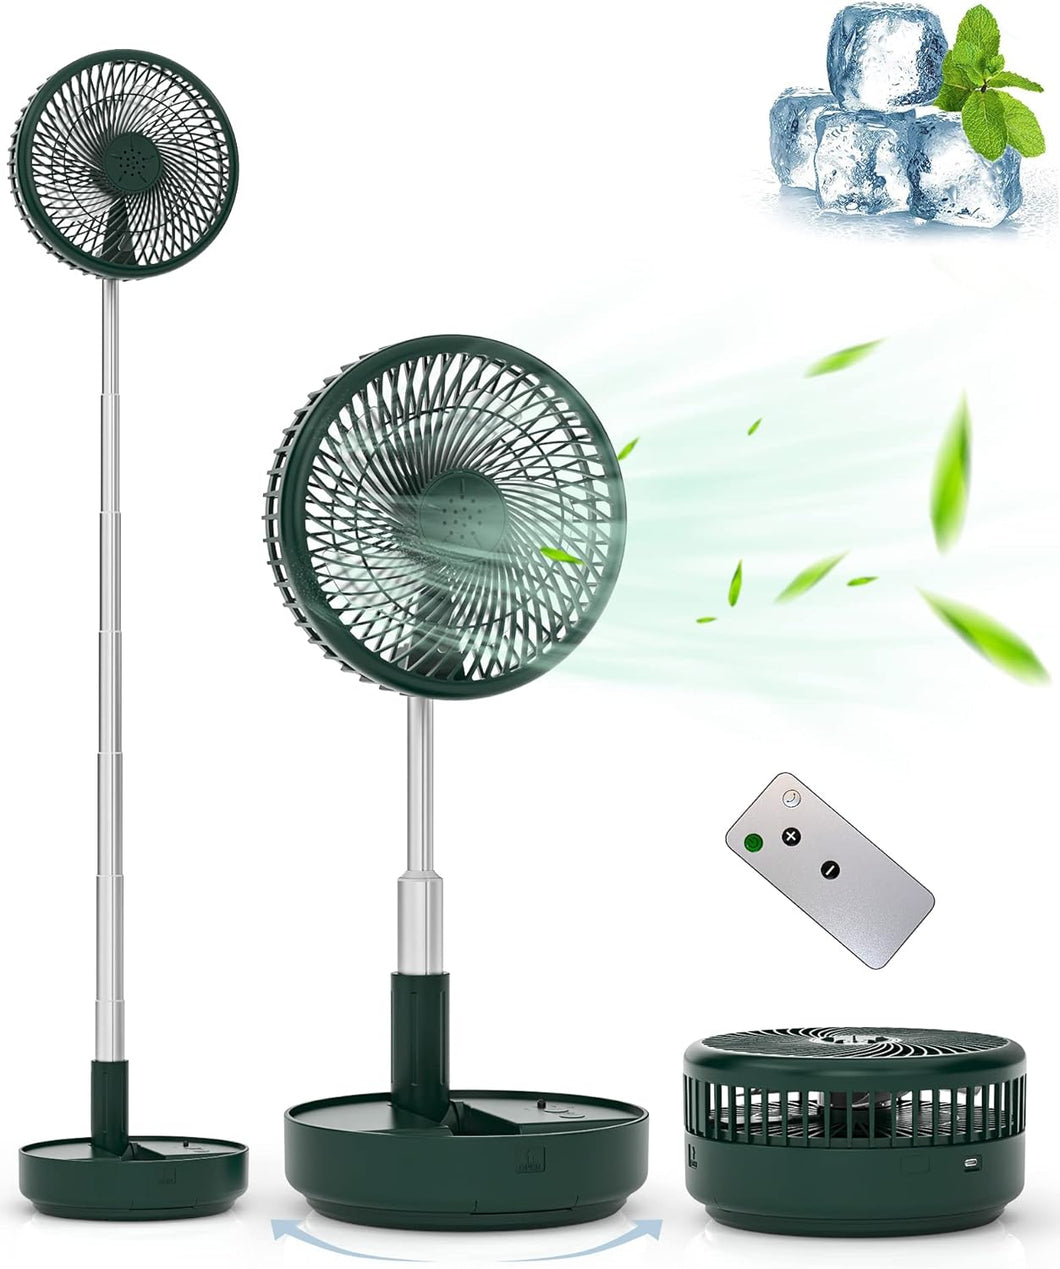 Portable Oscillating Standing Fan,Rechargeable Battery Operated USB Floor Table Desk Fan with Remote, 4 Speed Settings Pedestal Fans for Bedroom Office Camping Fishing Travel Green 7.7